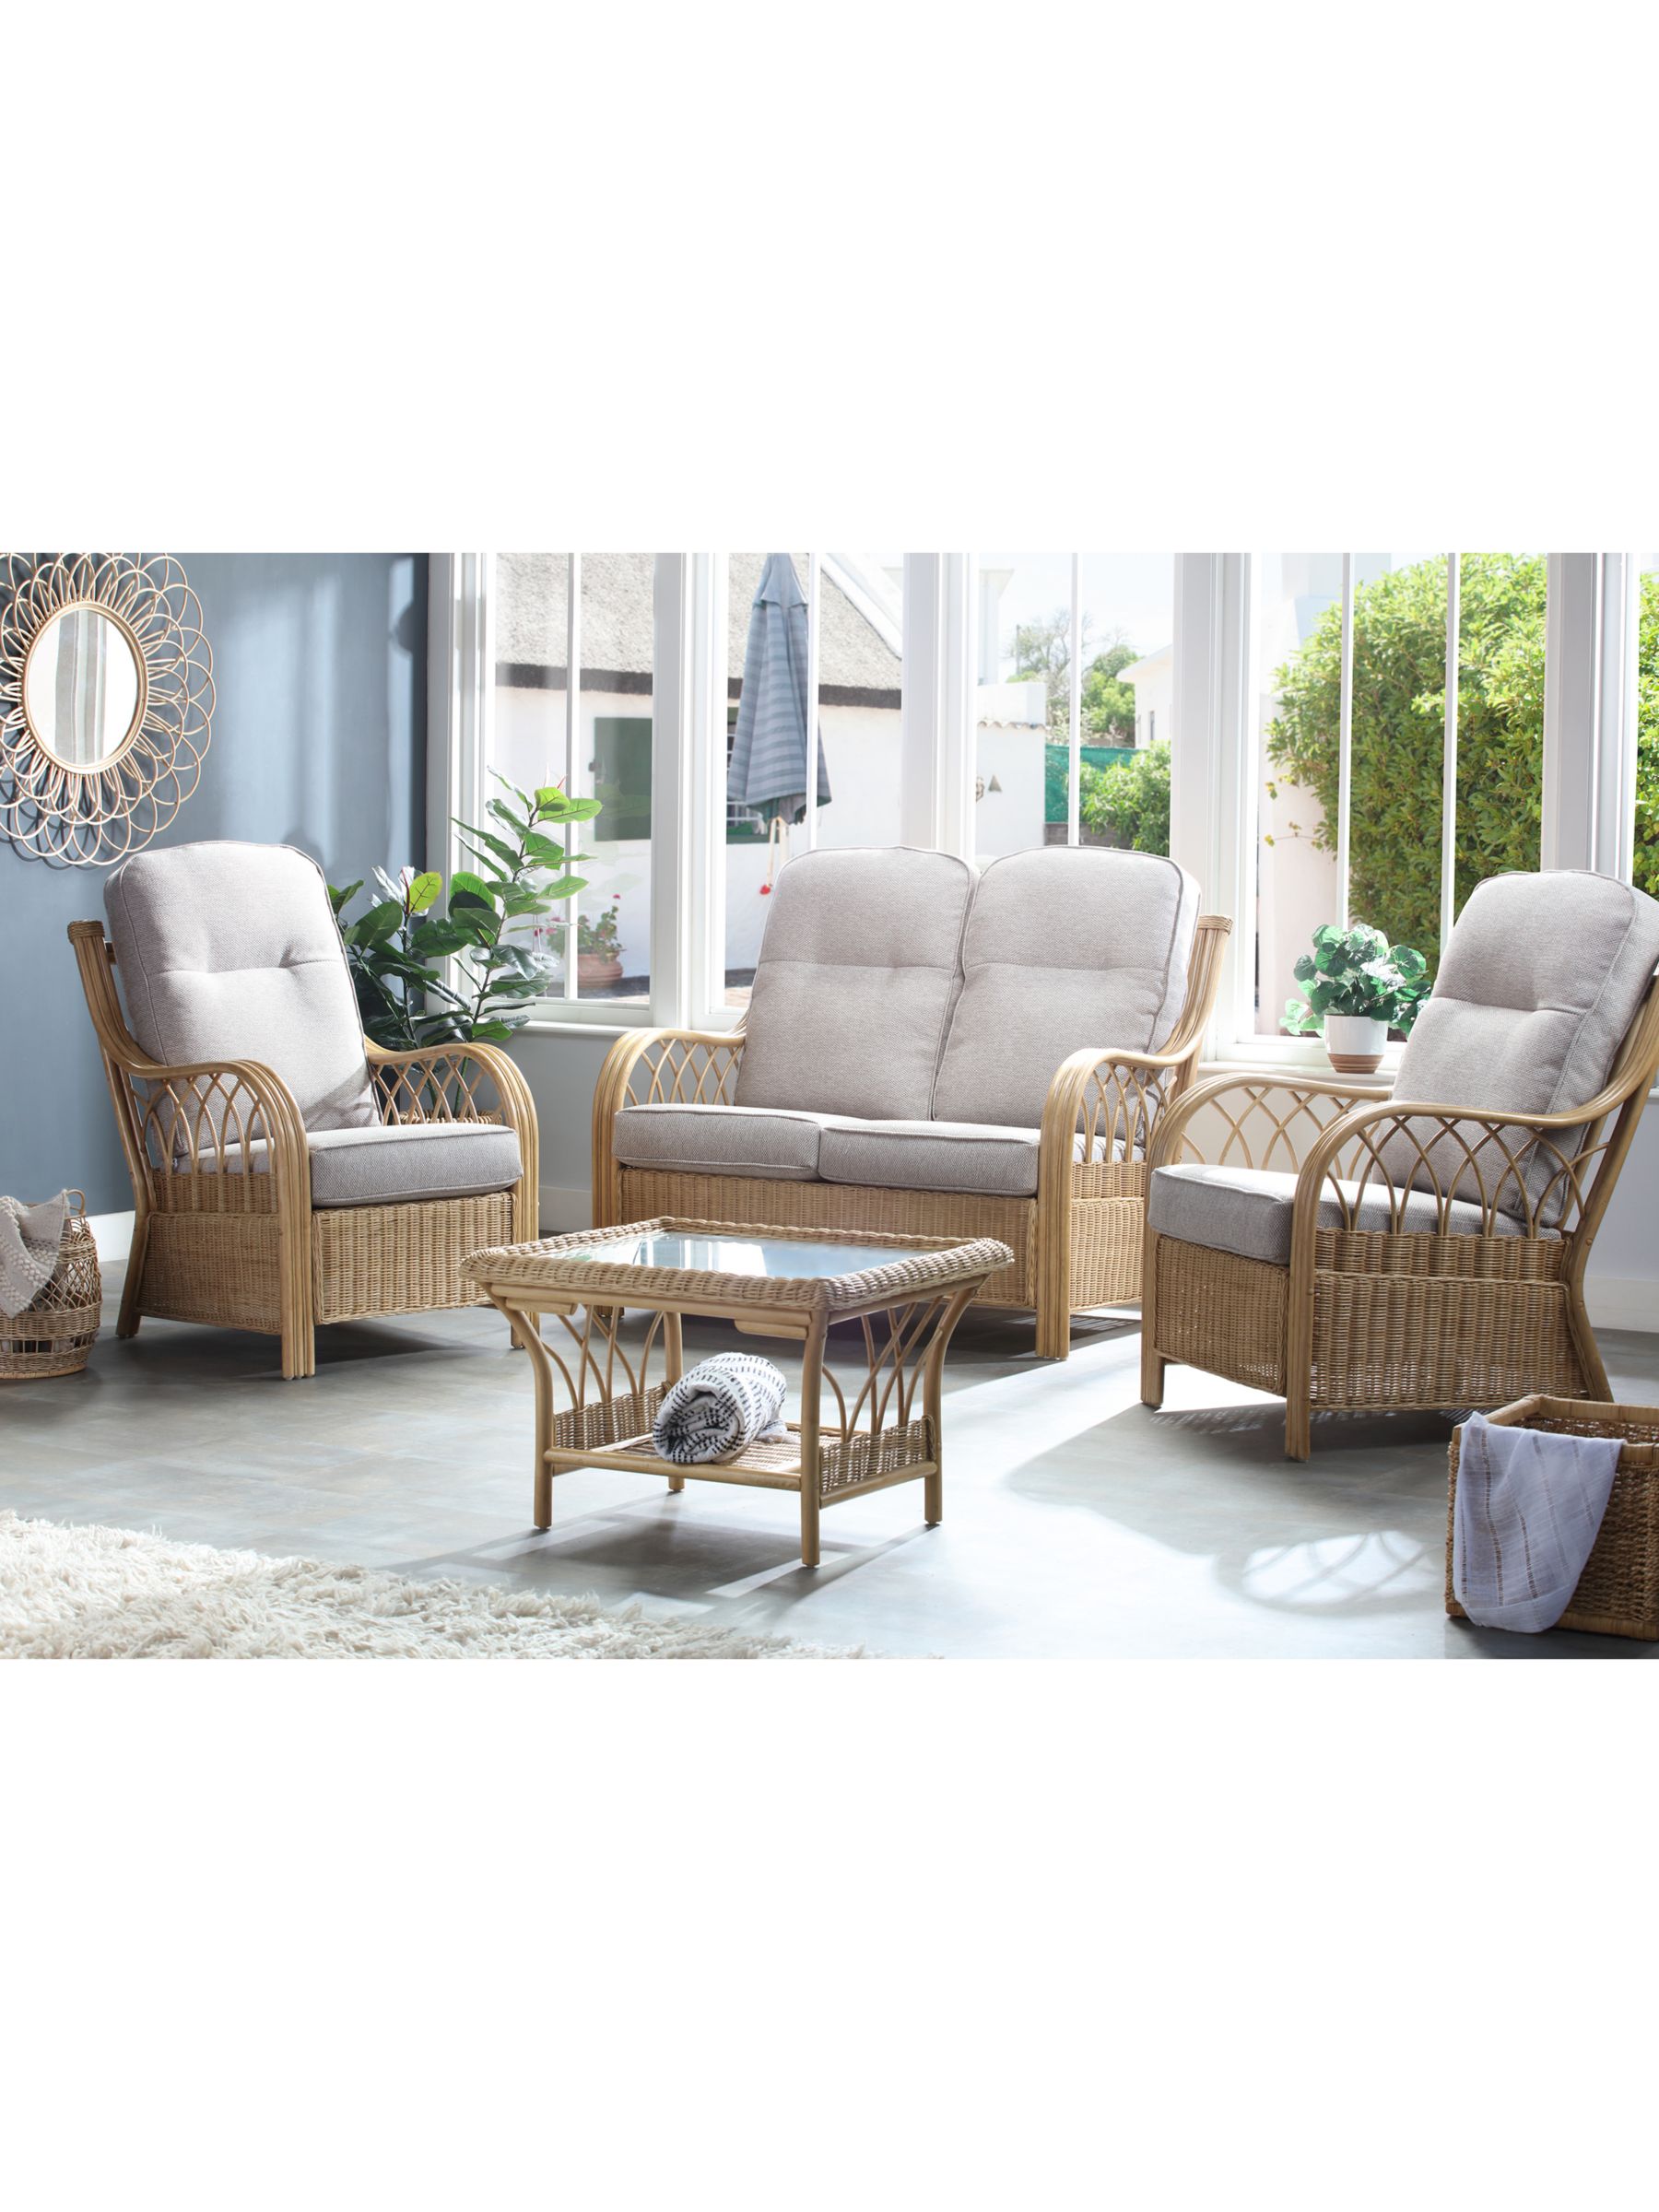 Photo of Desser viola rattan 4-seater lounging table & chairs set natural